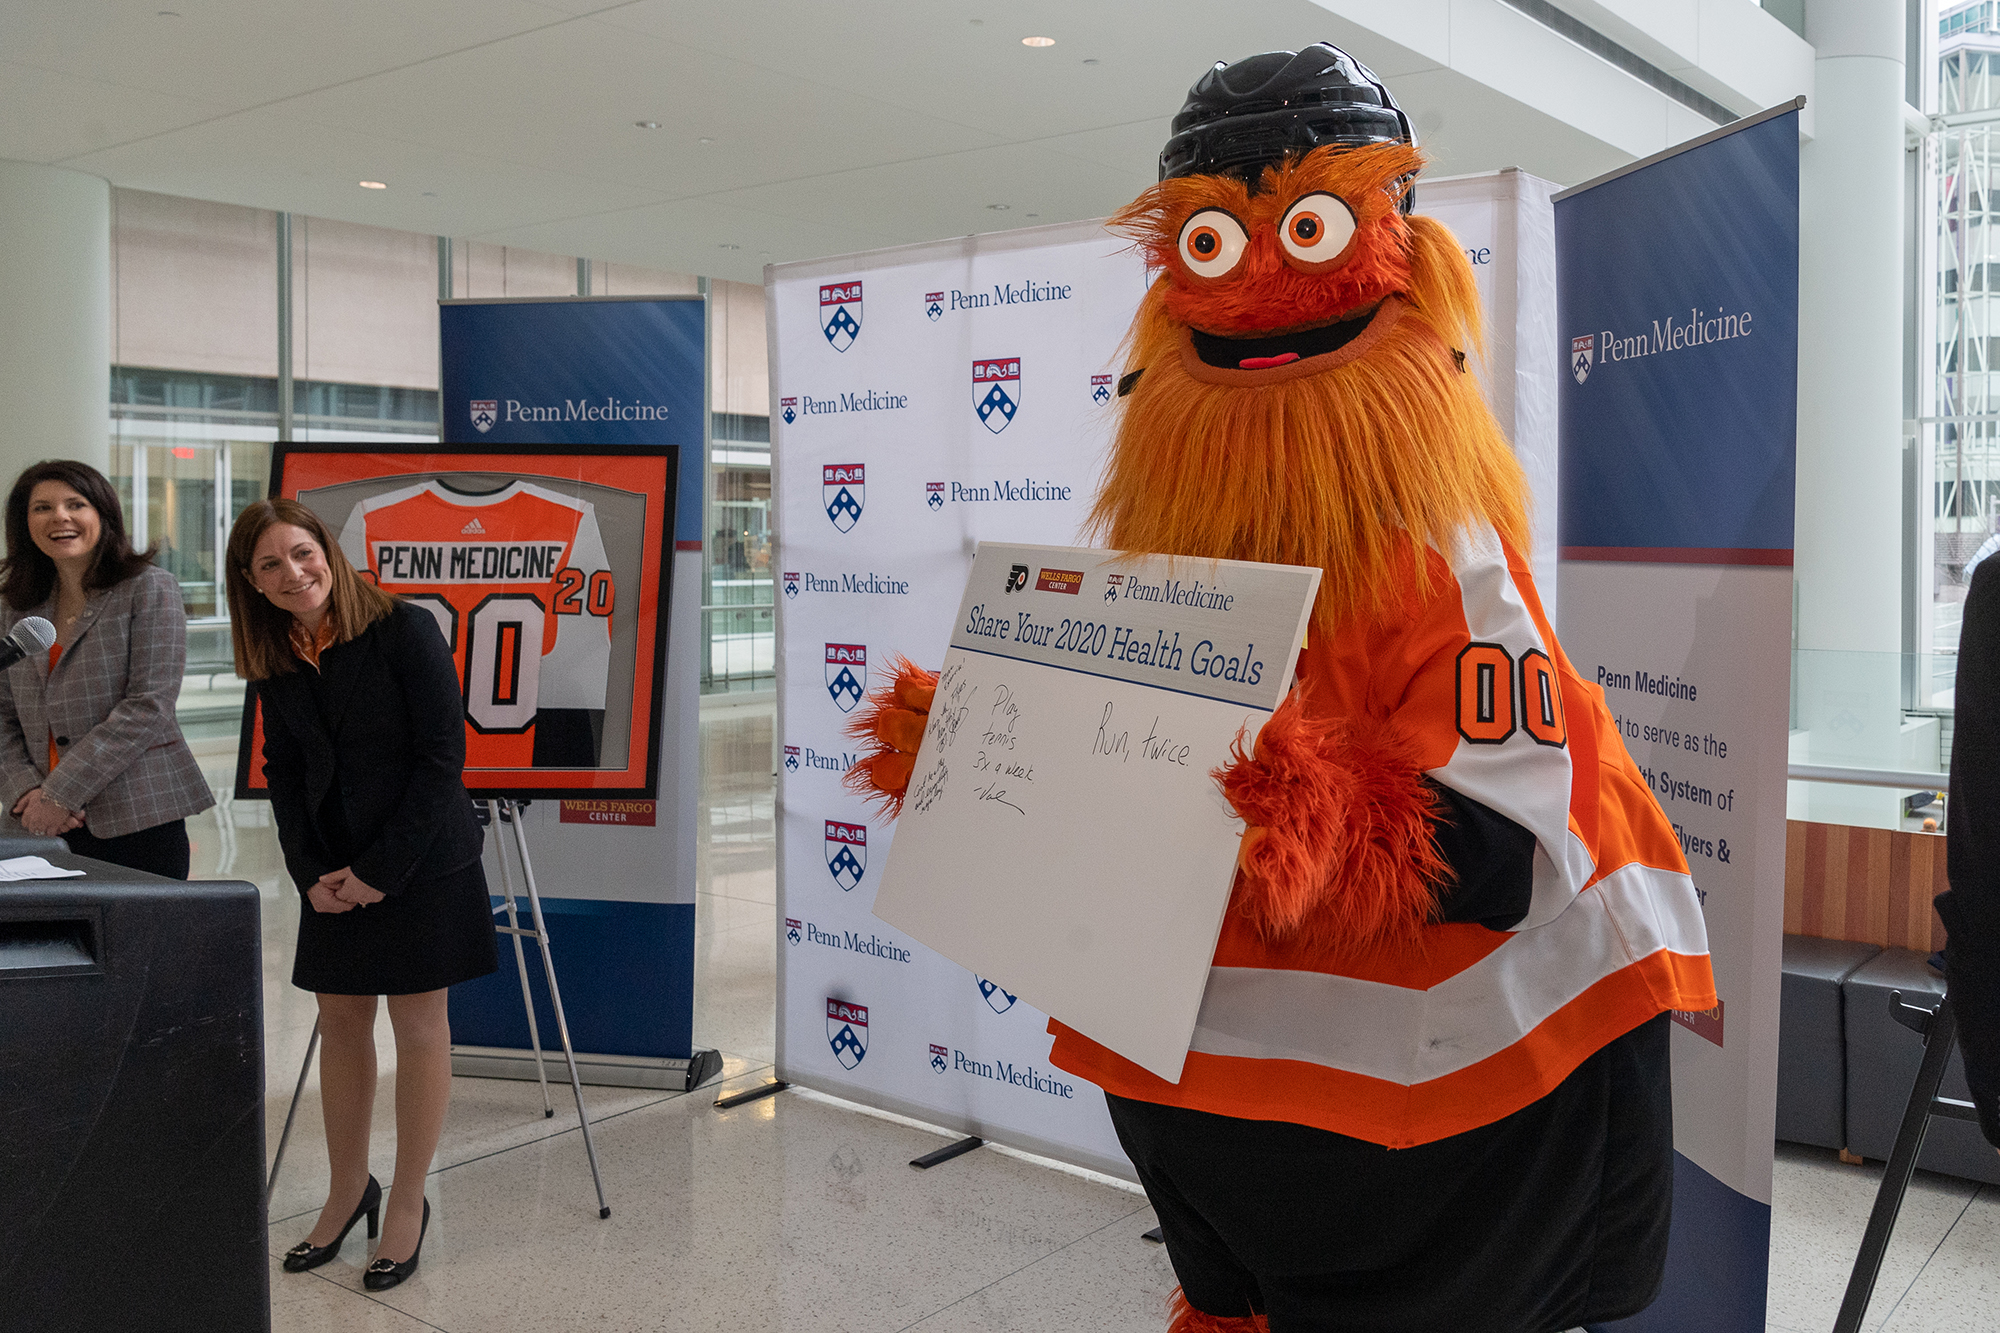 Philly Flyers’s mascot Gritty shares their 2020 health goals at the announcement of the team’s partnership with Penn Medicine.